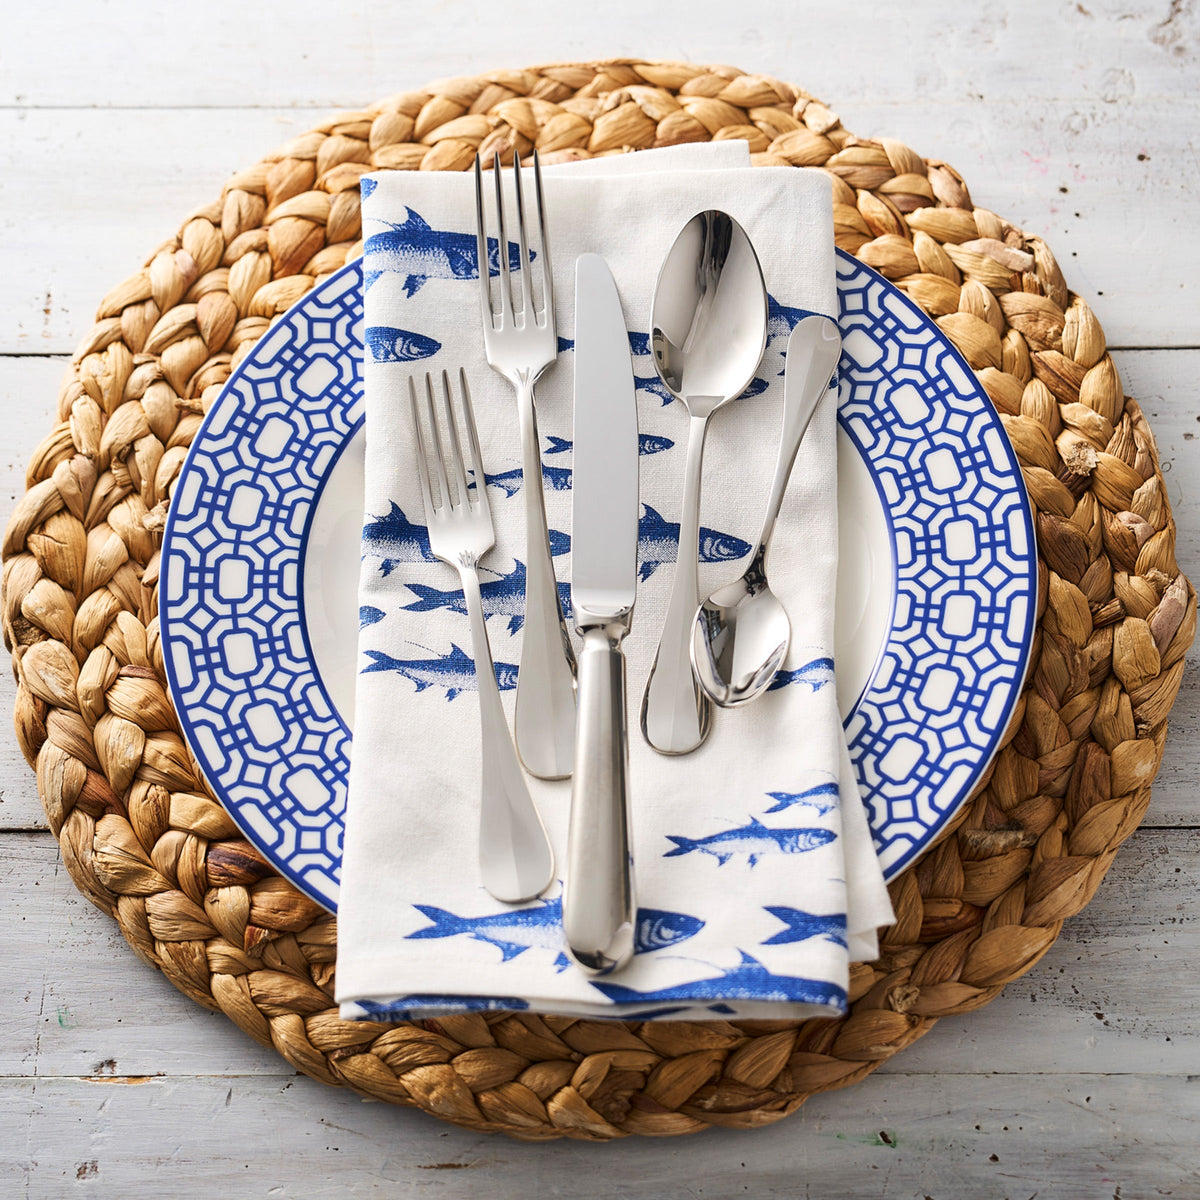 Blue and white patterned plate from the Caskata School of Fish dinnerware collection, with School of Fish Dinner Napkins, set with silverware on a round woven placemat.